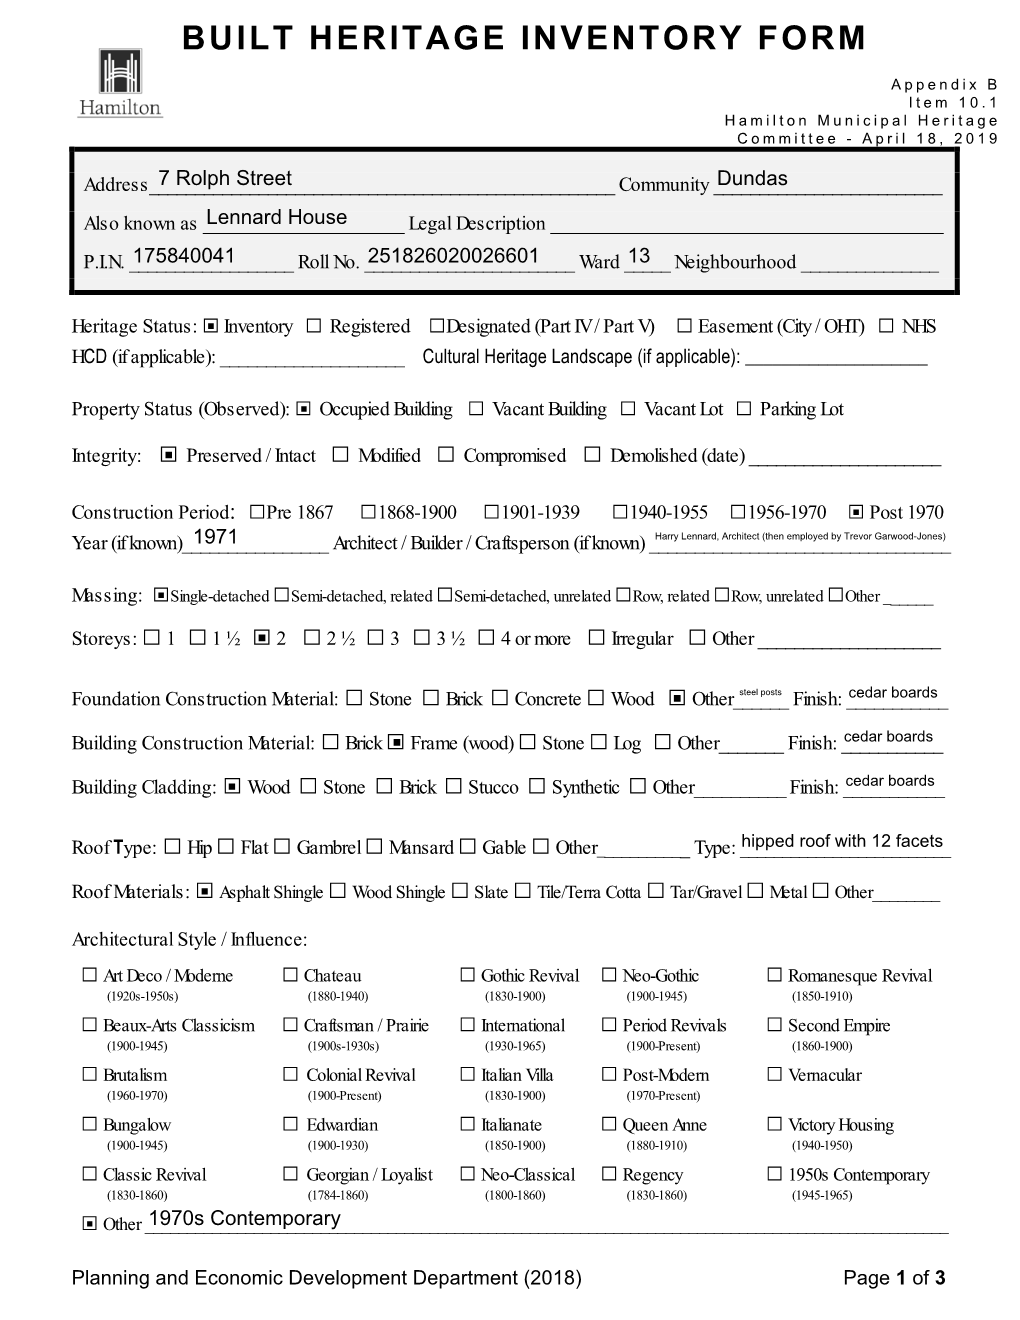 Built Heritage Inventory Form